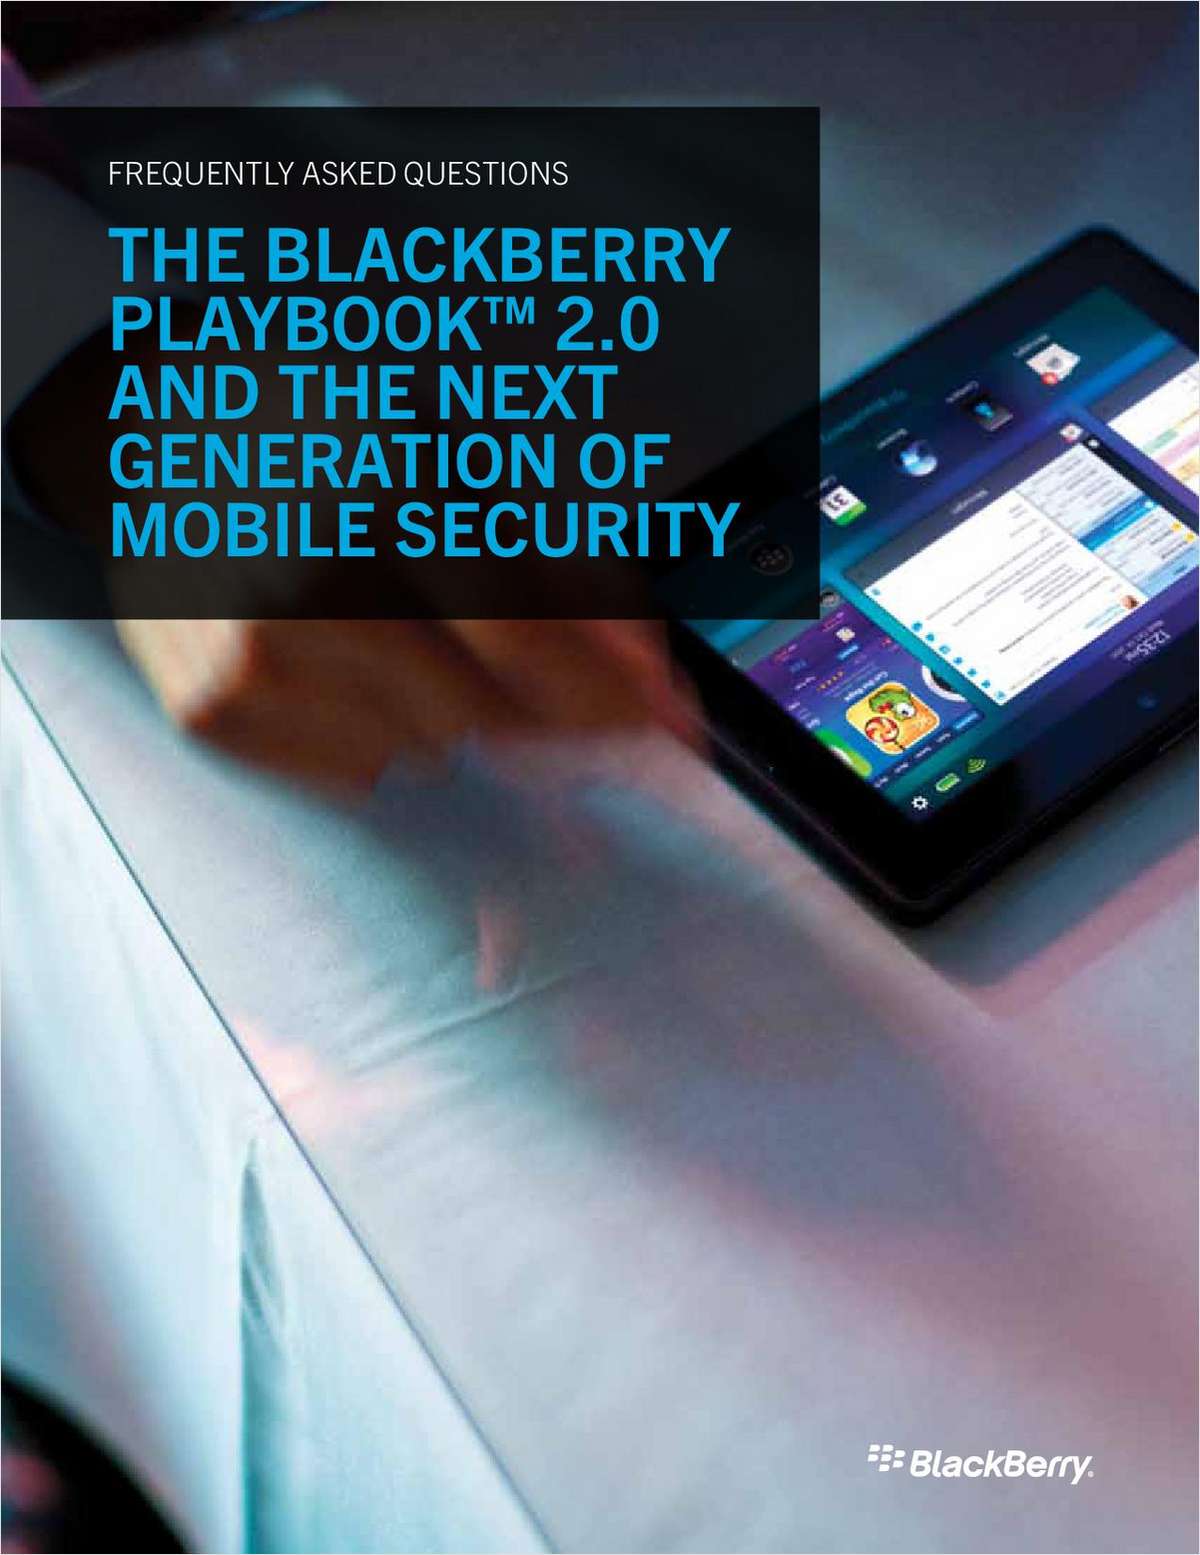 The BlackBerry PlayBook 2.0 and the Next Generation of Mobile Security